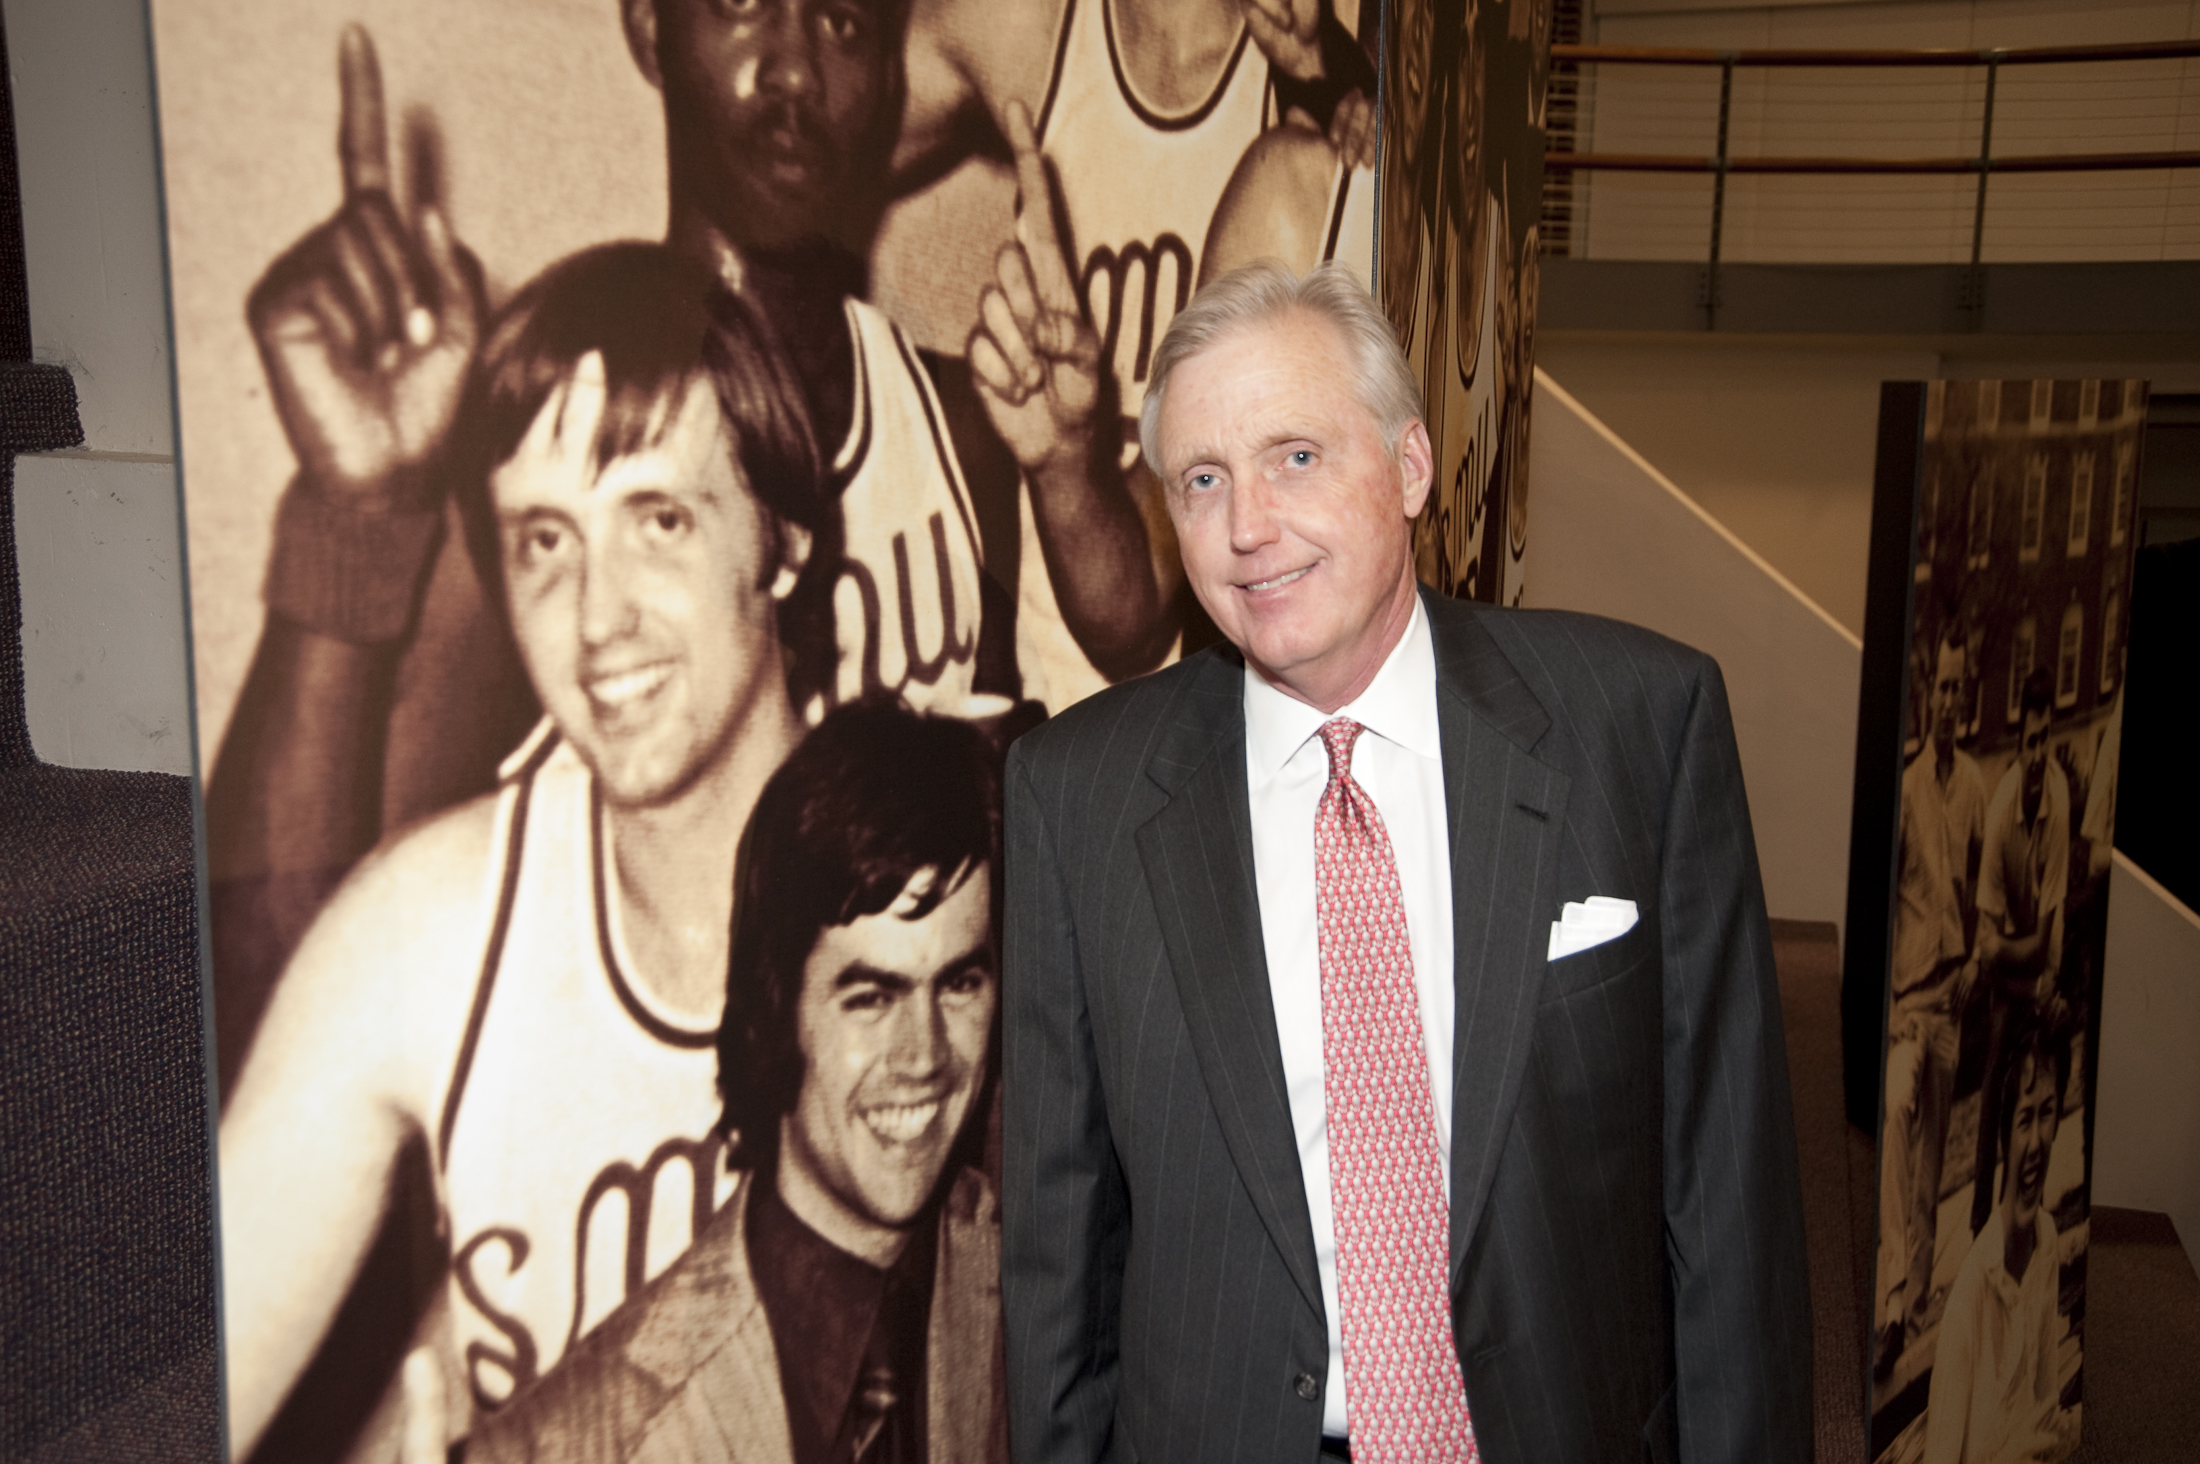 David B. Miller ’72, ’73 stands in front of a photo of his younger self.